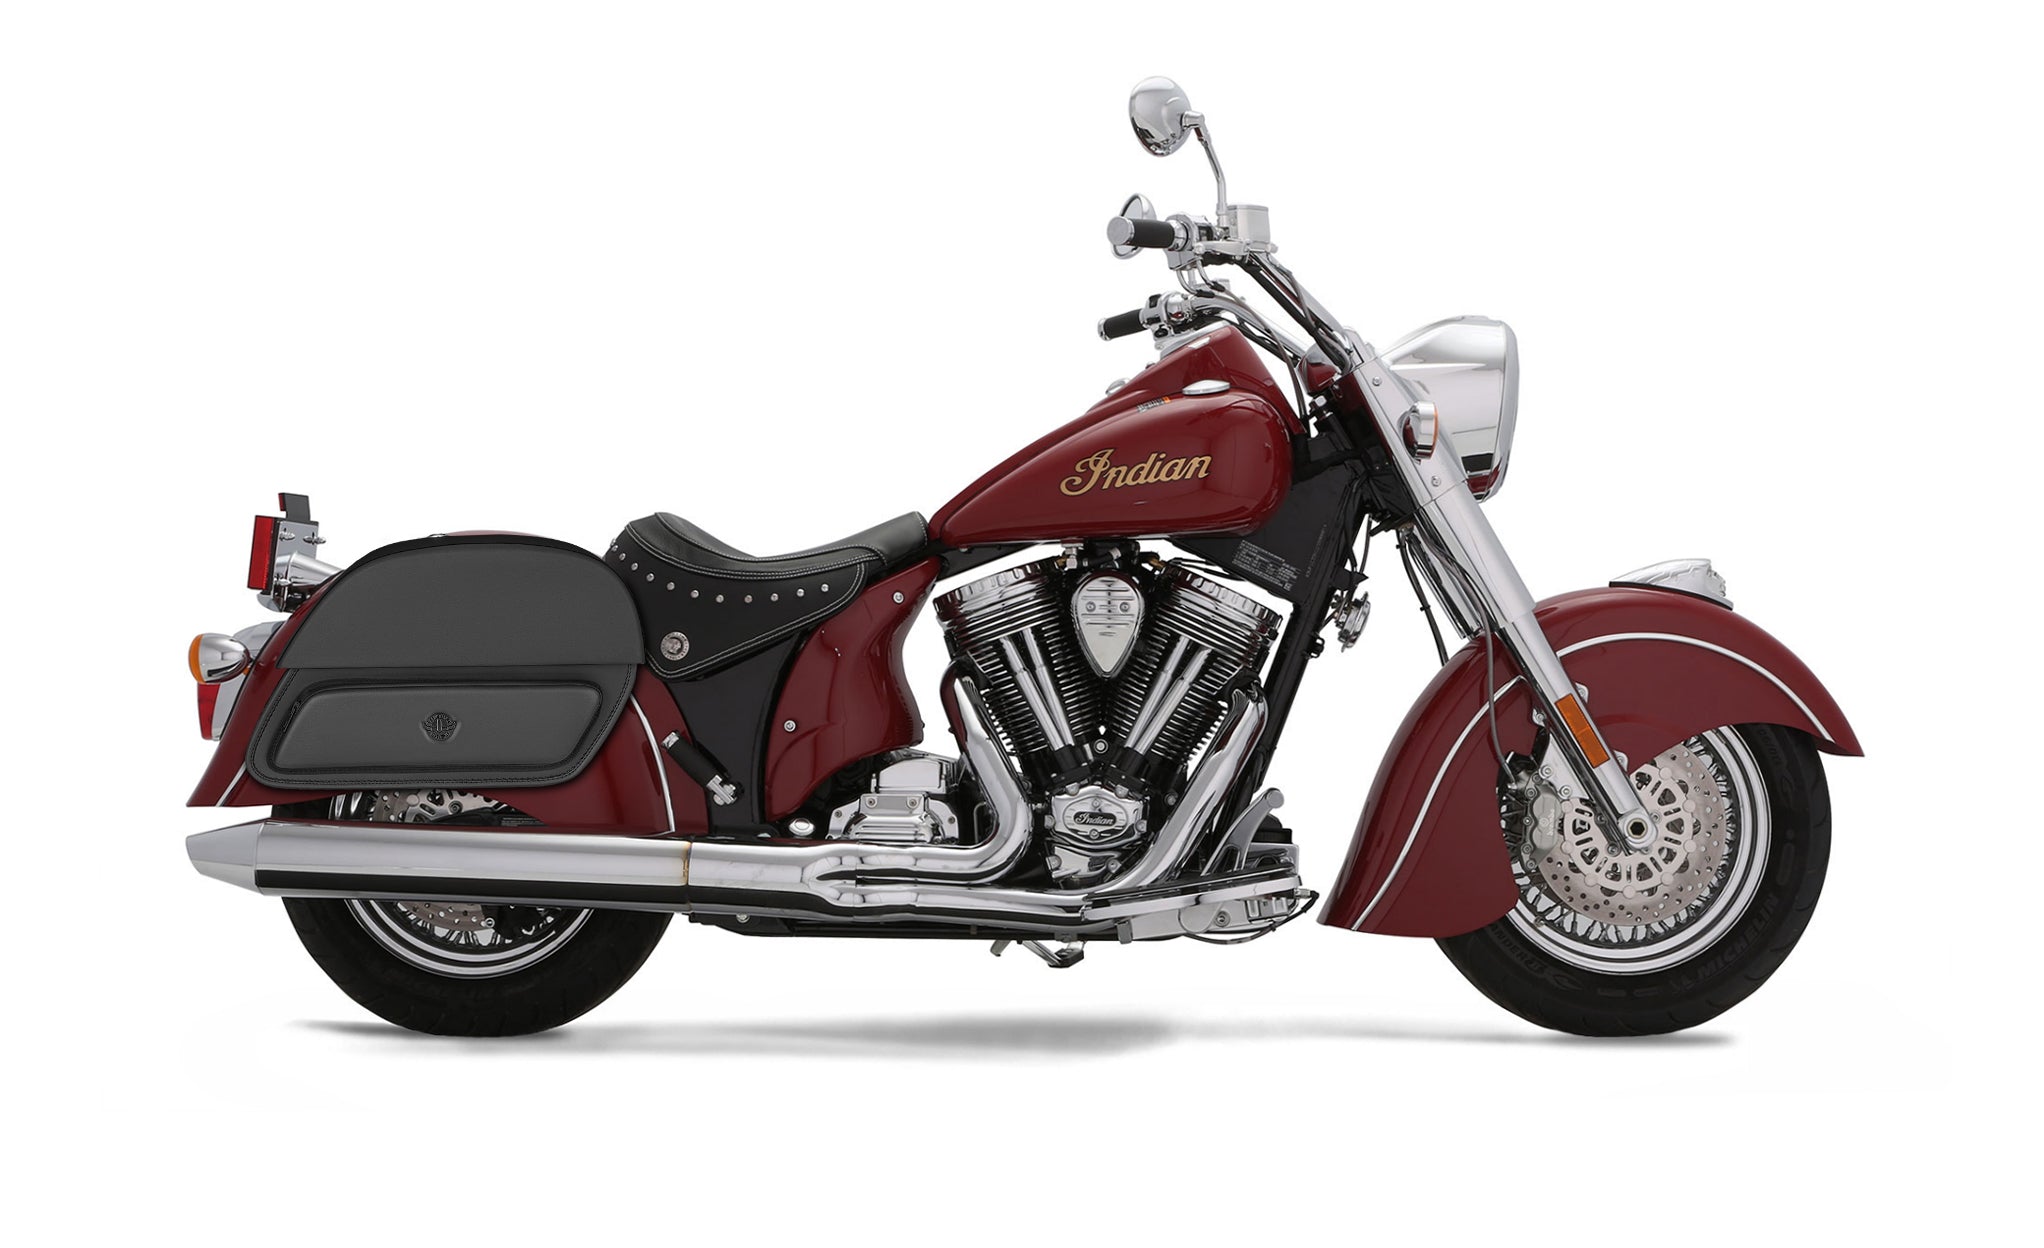 28L - Pantheon Medium Indian Chief Deluxe Motorcycle Saddlebags on Bike Photo @expand